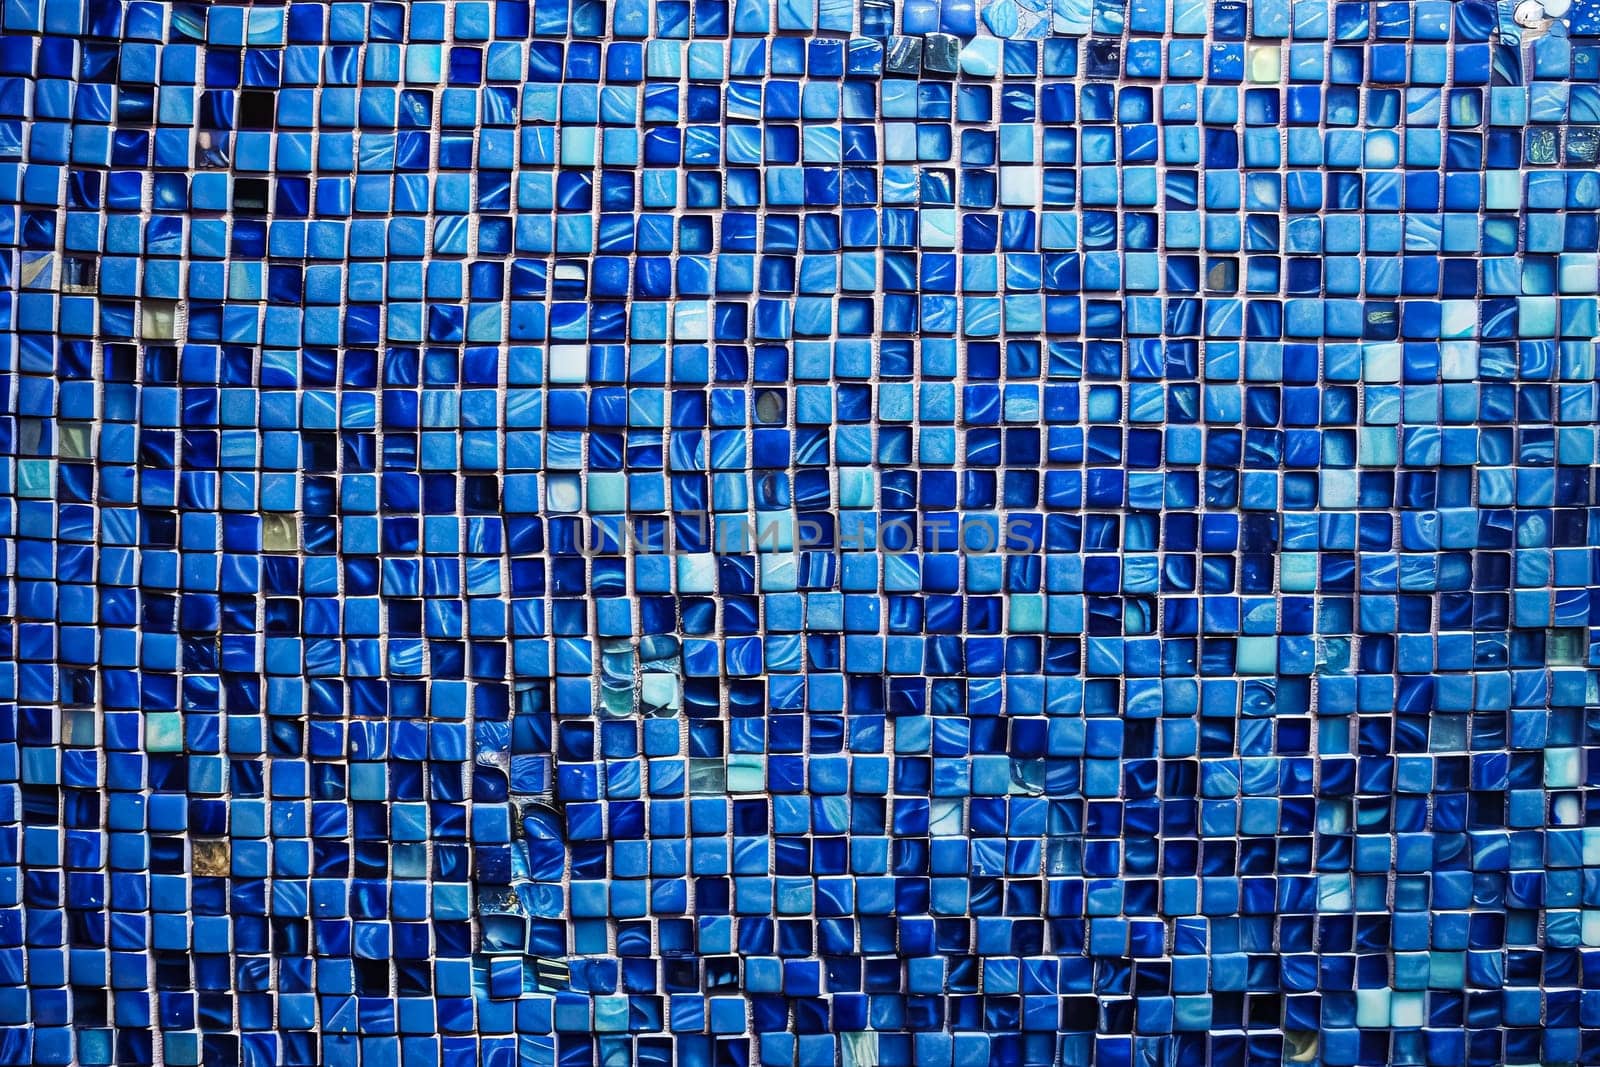 A blue mosaic tile wall with a blue and white swirl pattern. by Alla_Morozova93